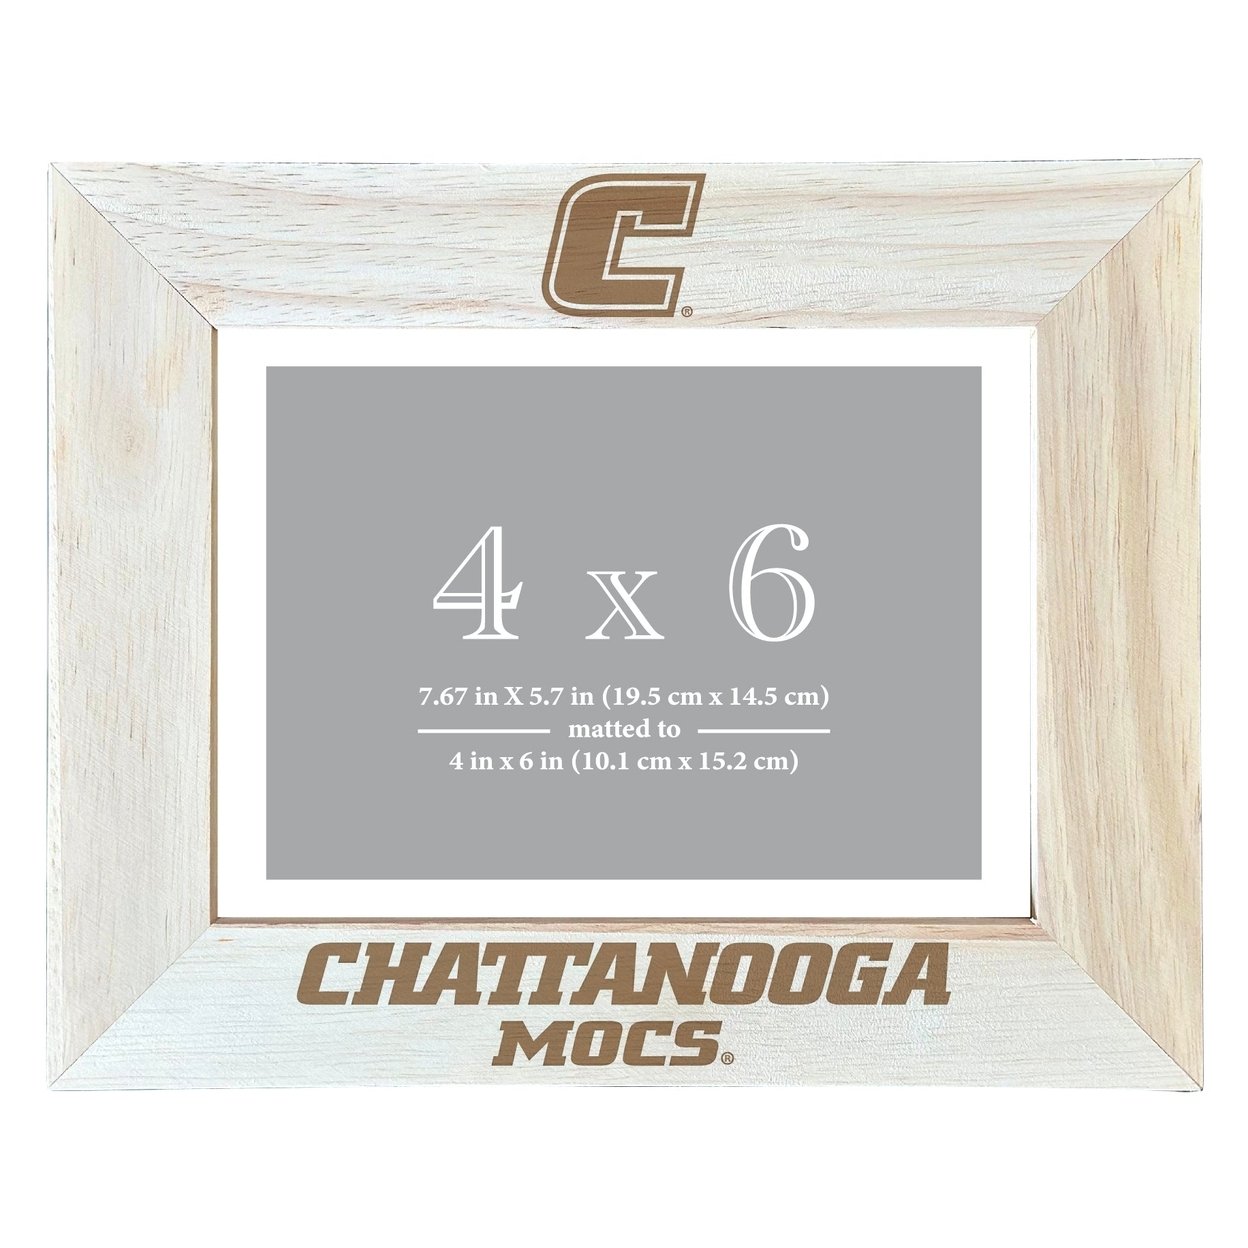 University Of Tennessee At Chattanooga Wooden Photo Frame Matted To 4 X 6 Inch - Etched